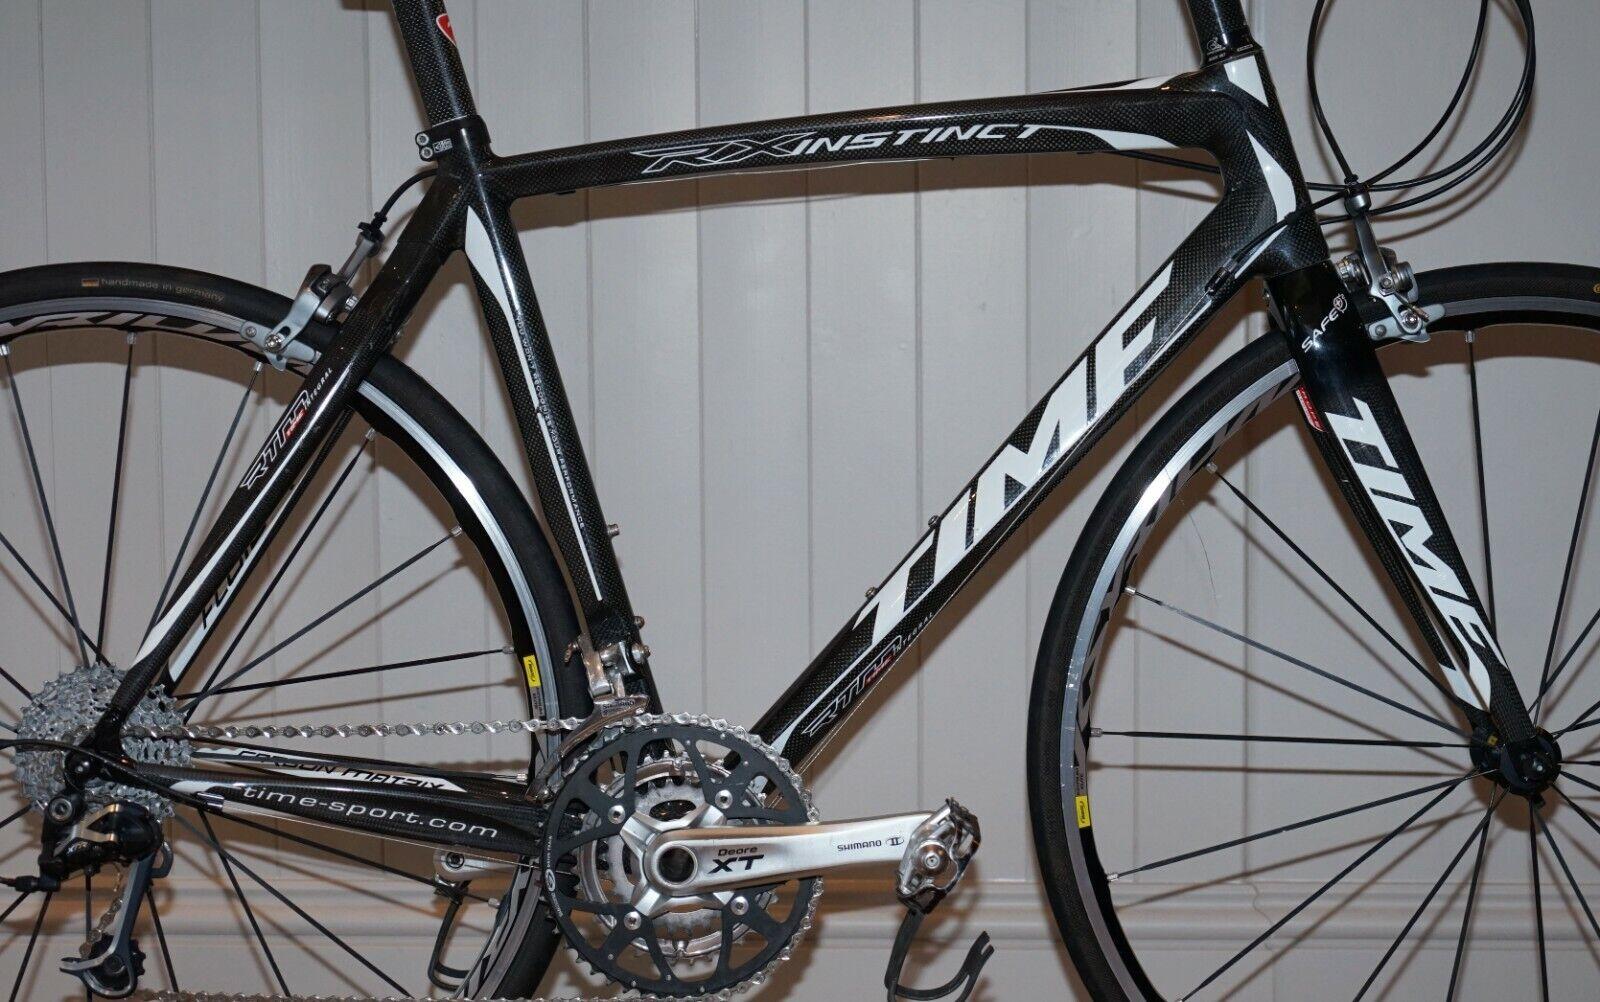 We are delighted to offer for sale this stunning custom made to order 54cm Time RX Instinct RTM full carbon hybrid road bike with Ksyrium Elite wheelset RRP £3500

HISTORY

I am selling my entire bike collection which comprises of 16 bikes, all